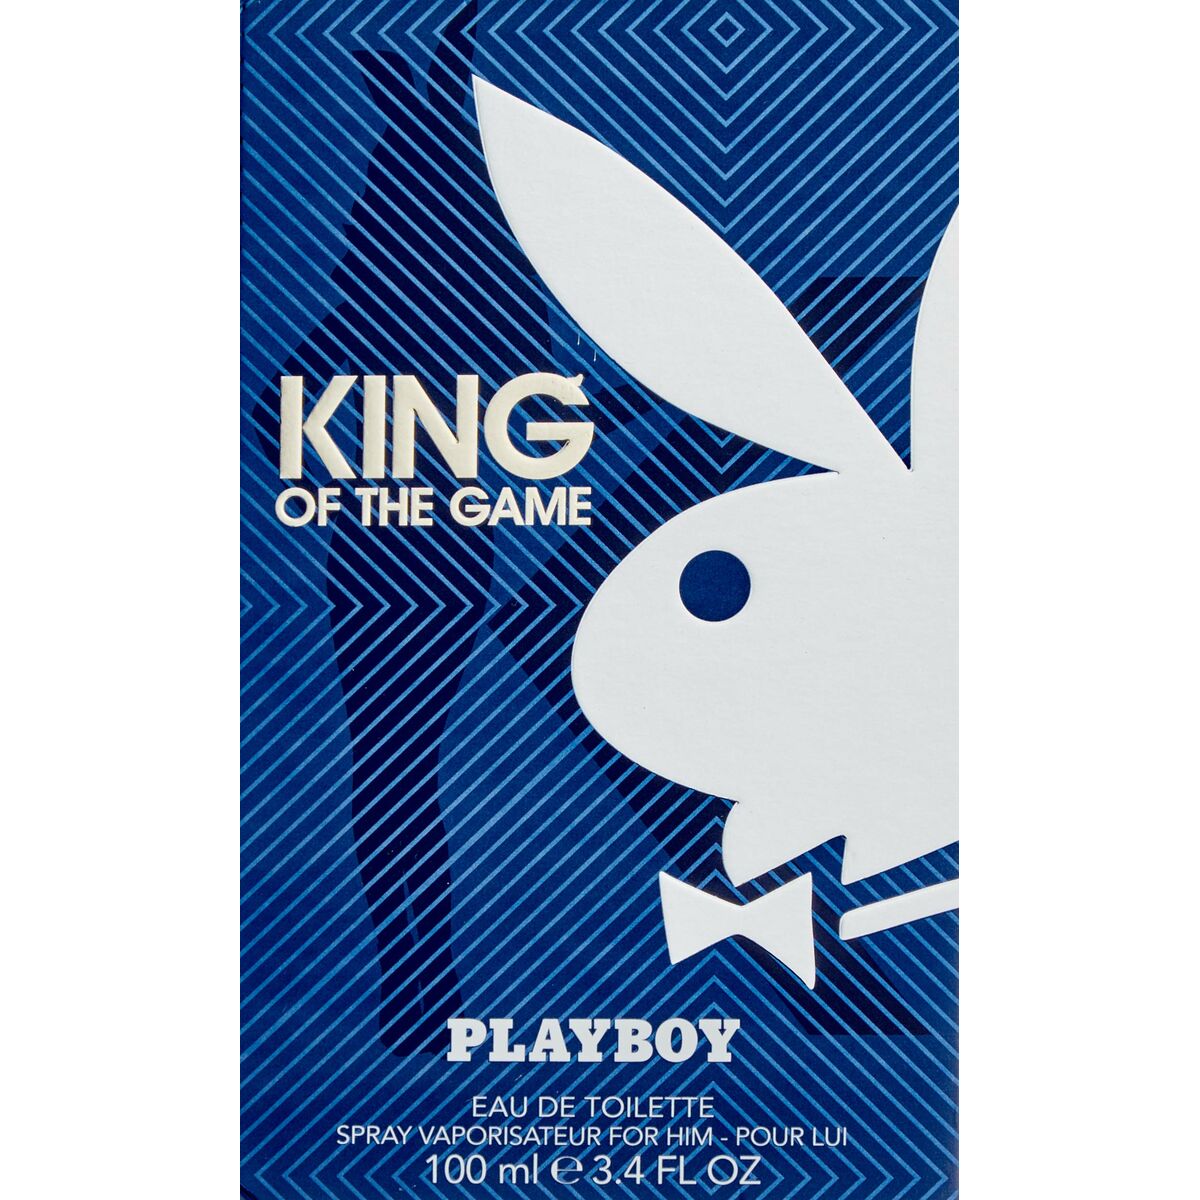 Men's Perfume Playboy EDT King of The Game 100 ml